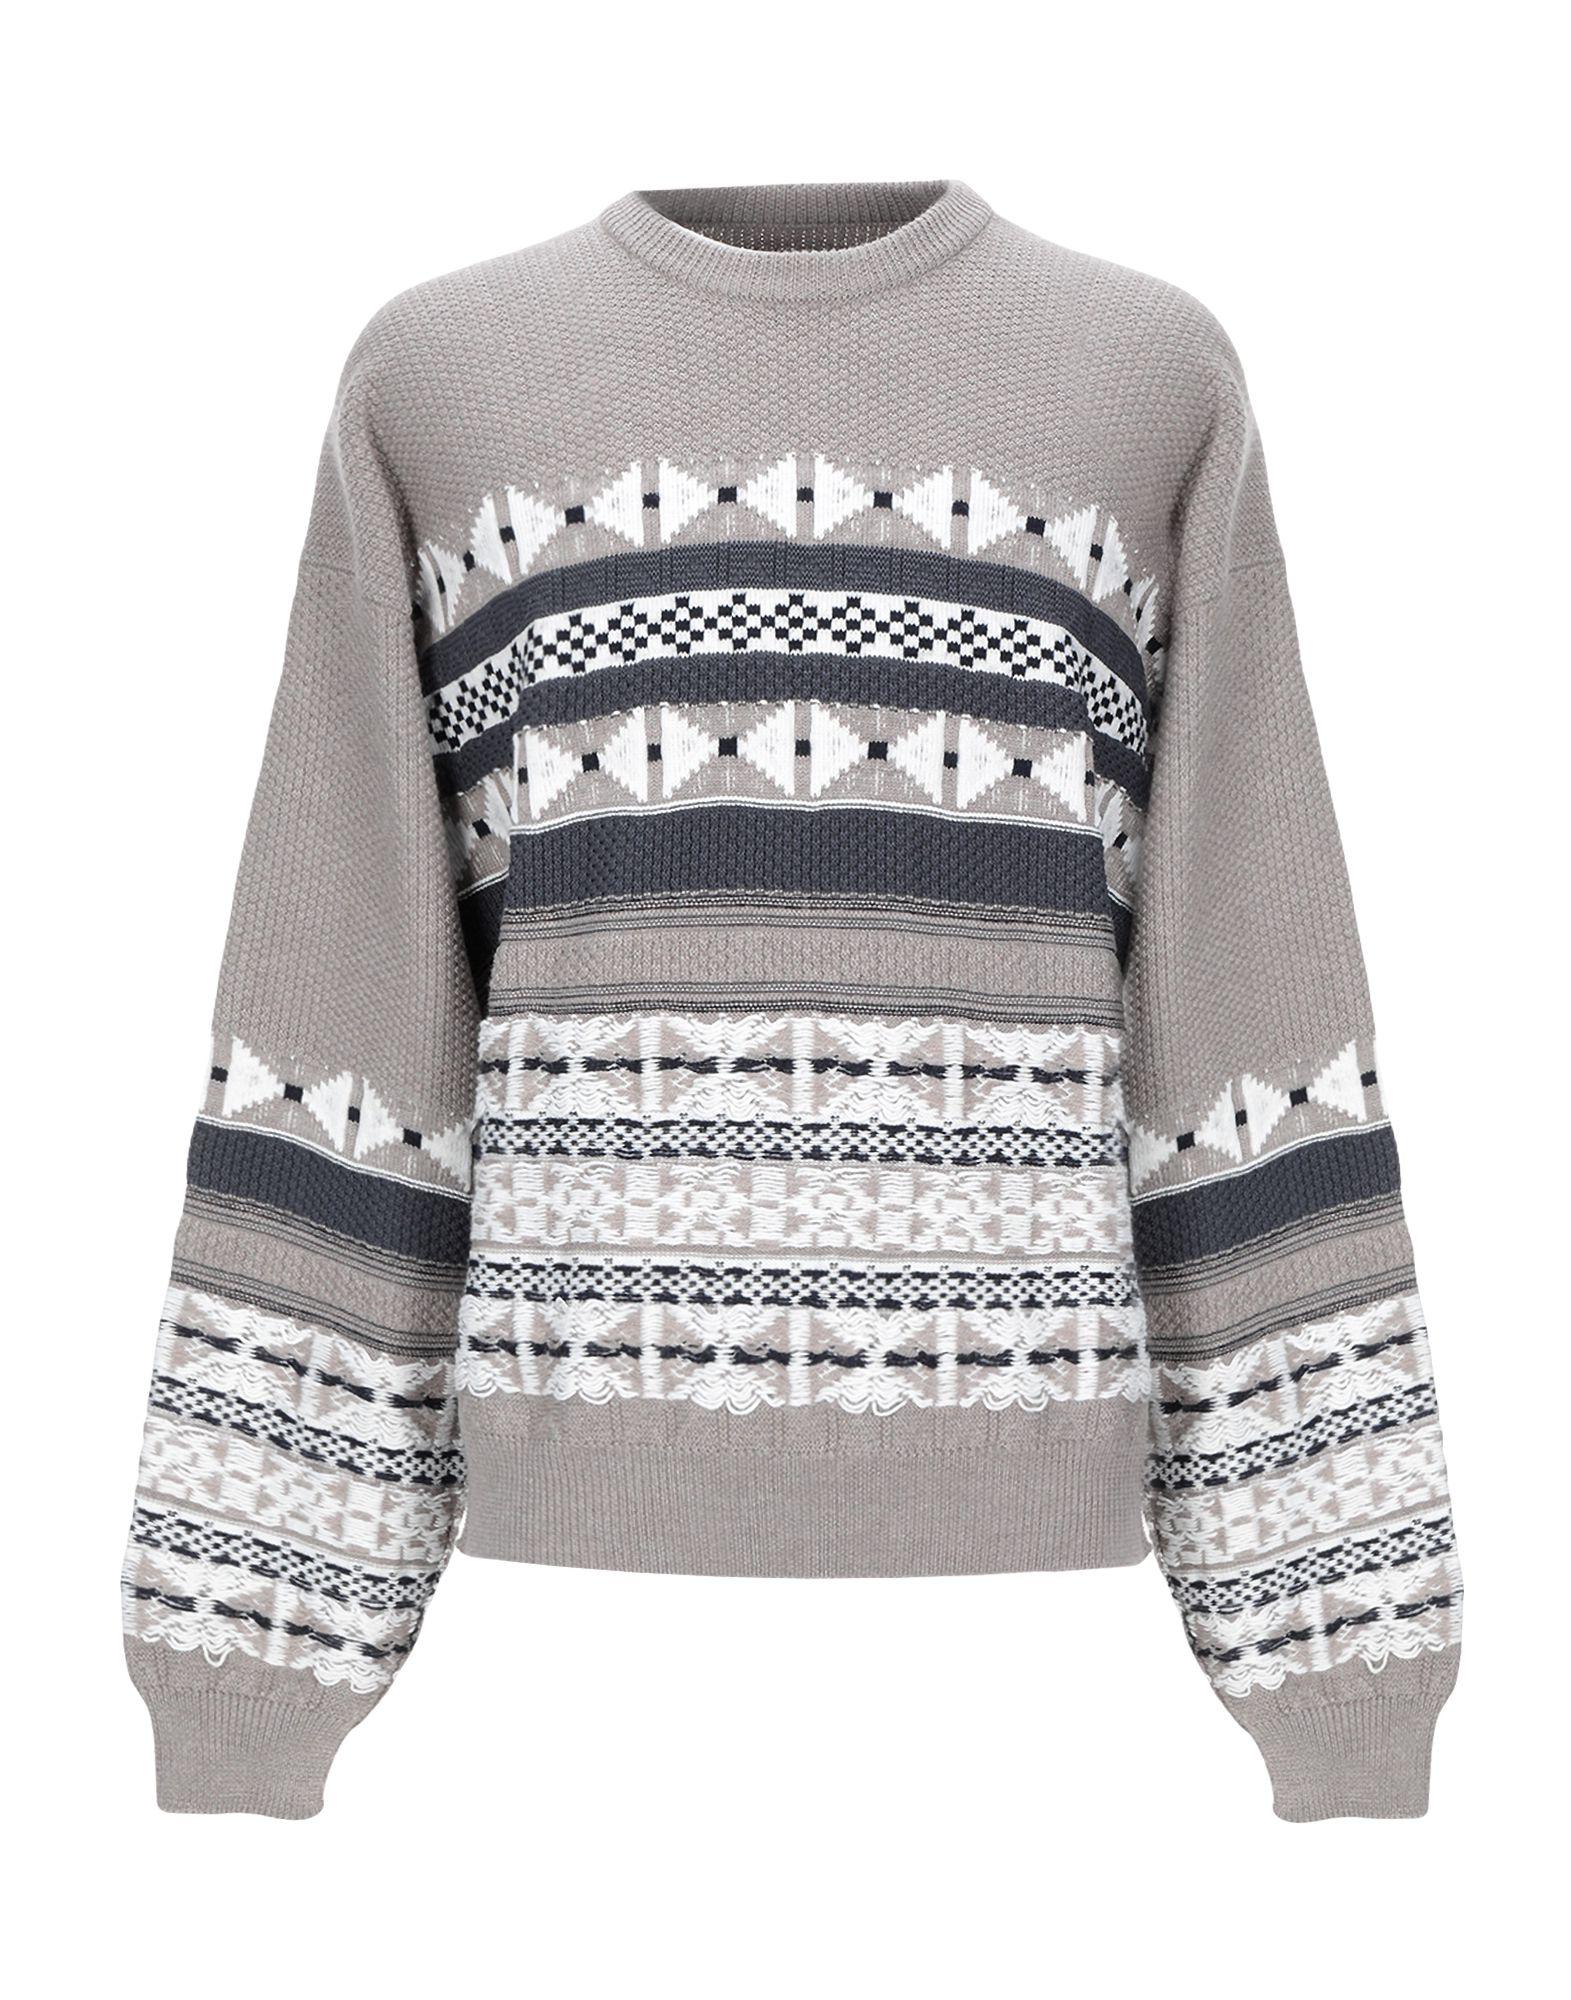 Maison Margiela Cotton Sweater in Grey (Gray) for Men - Save 13% - Lyst